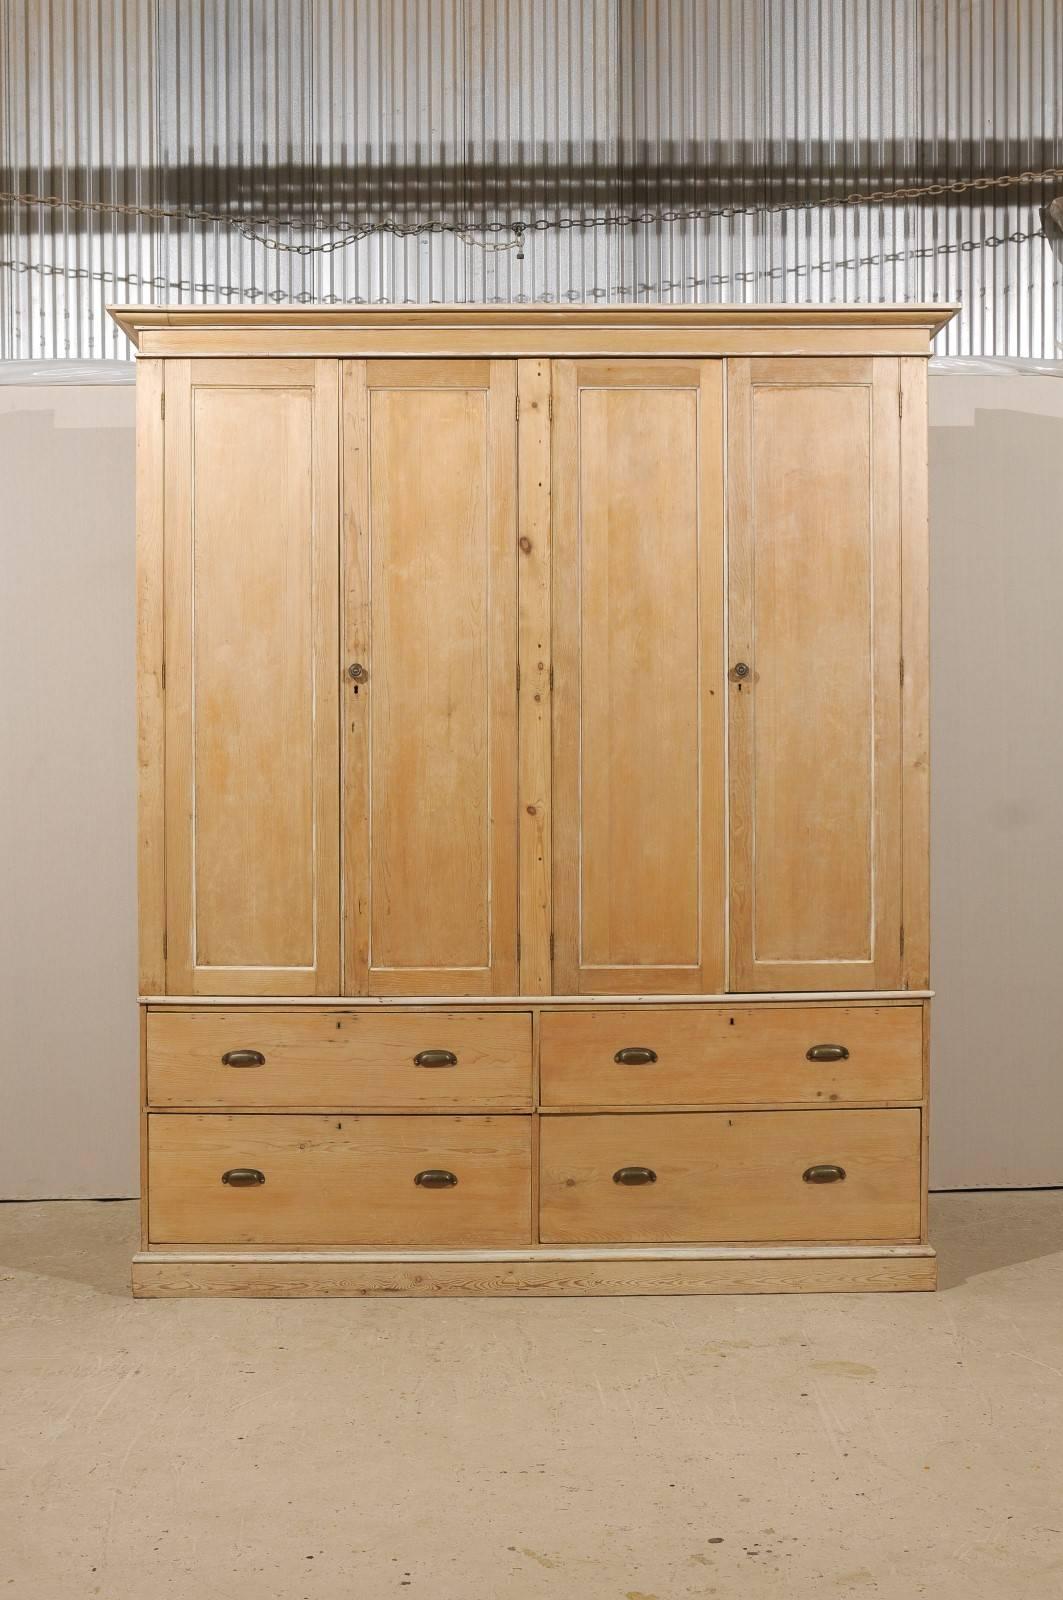 A large English vintage natural wood cabinet. This oversized English cabinet from the mid-20th century features four doors over four large drawers. The top doors open up to multiple adjustable interior shelves. This cabinet breaks down into two